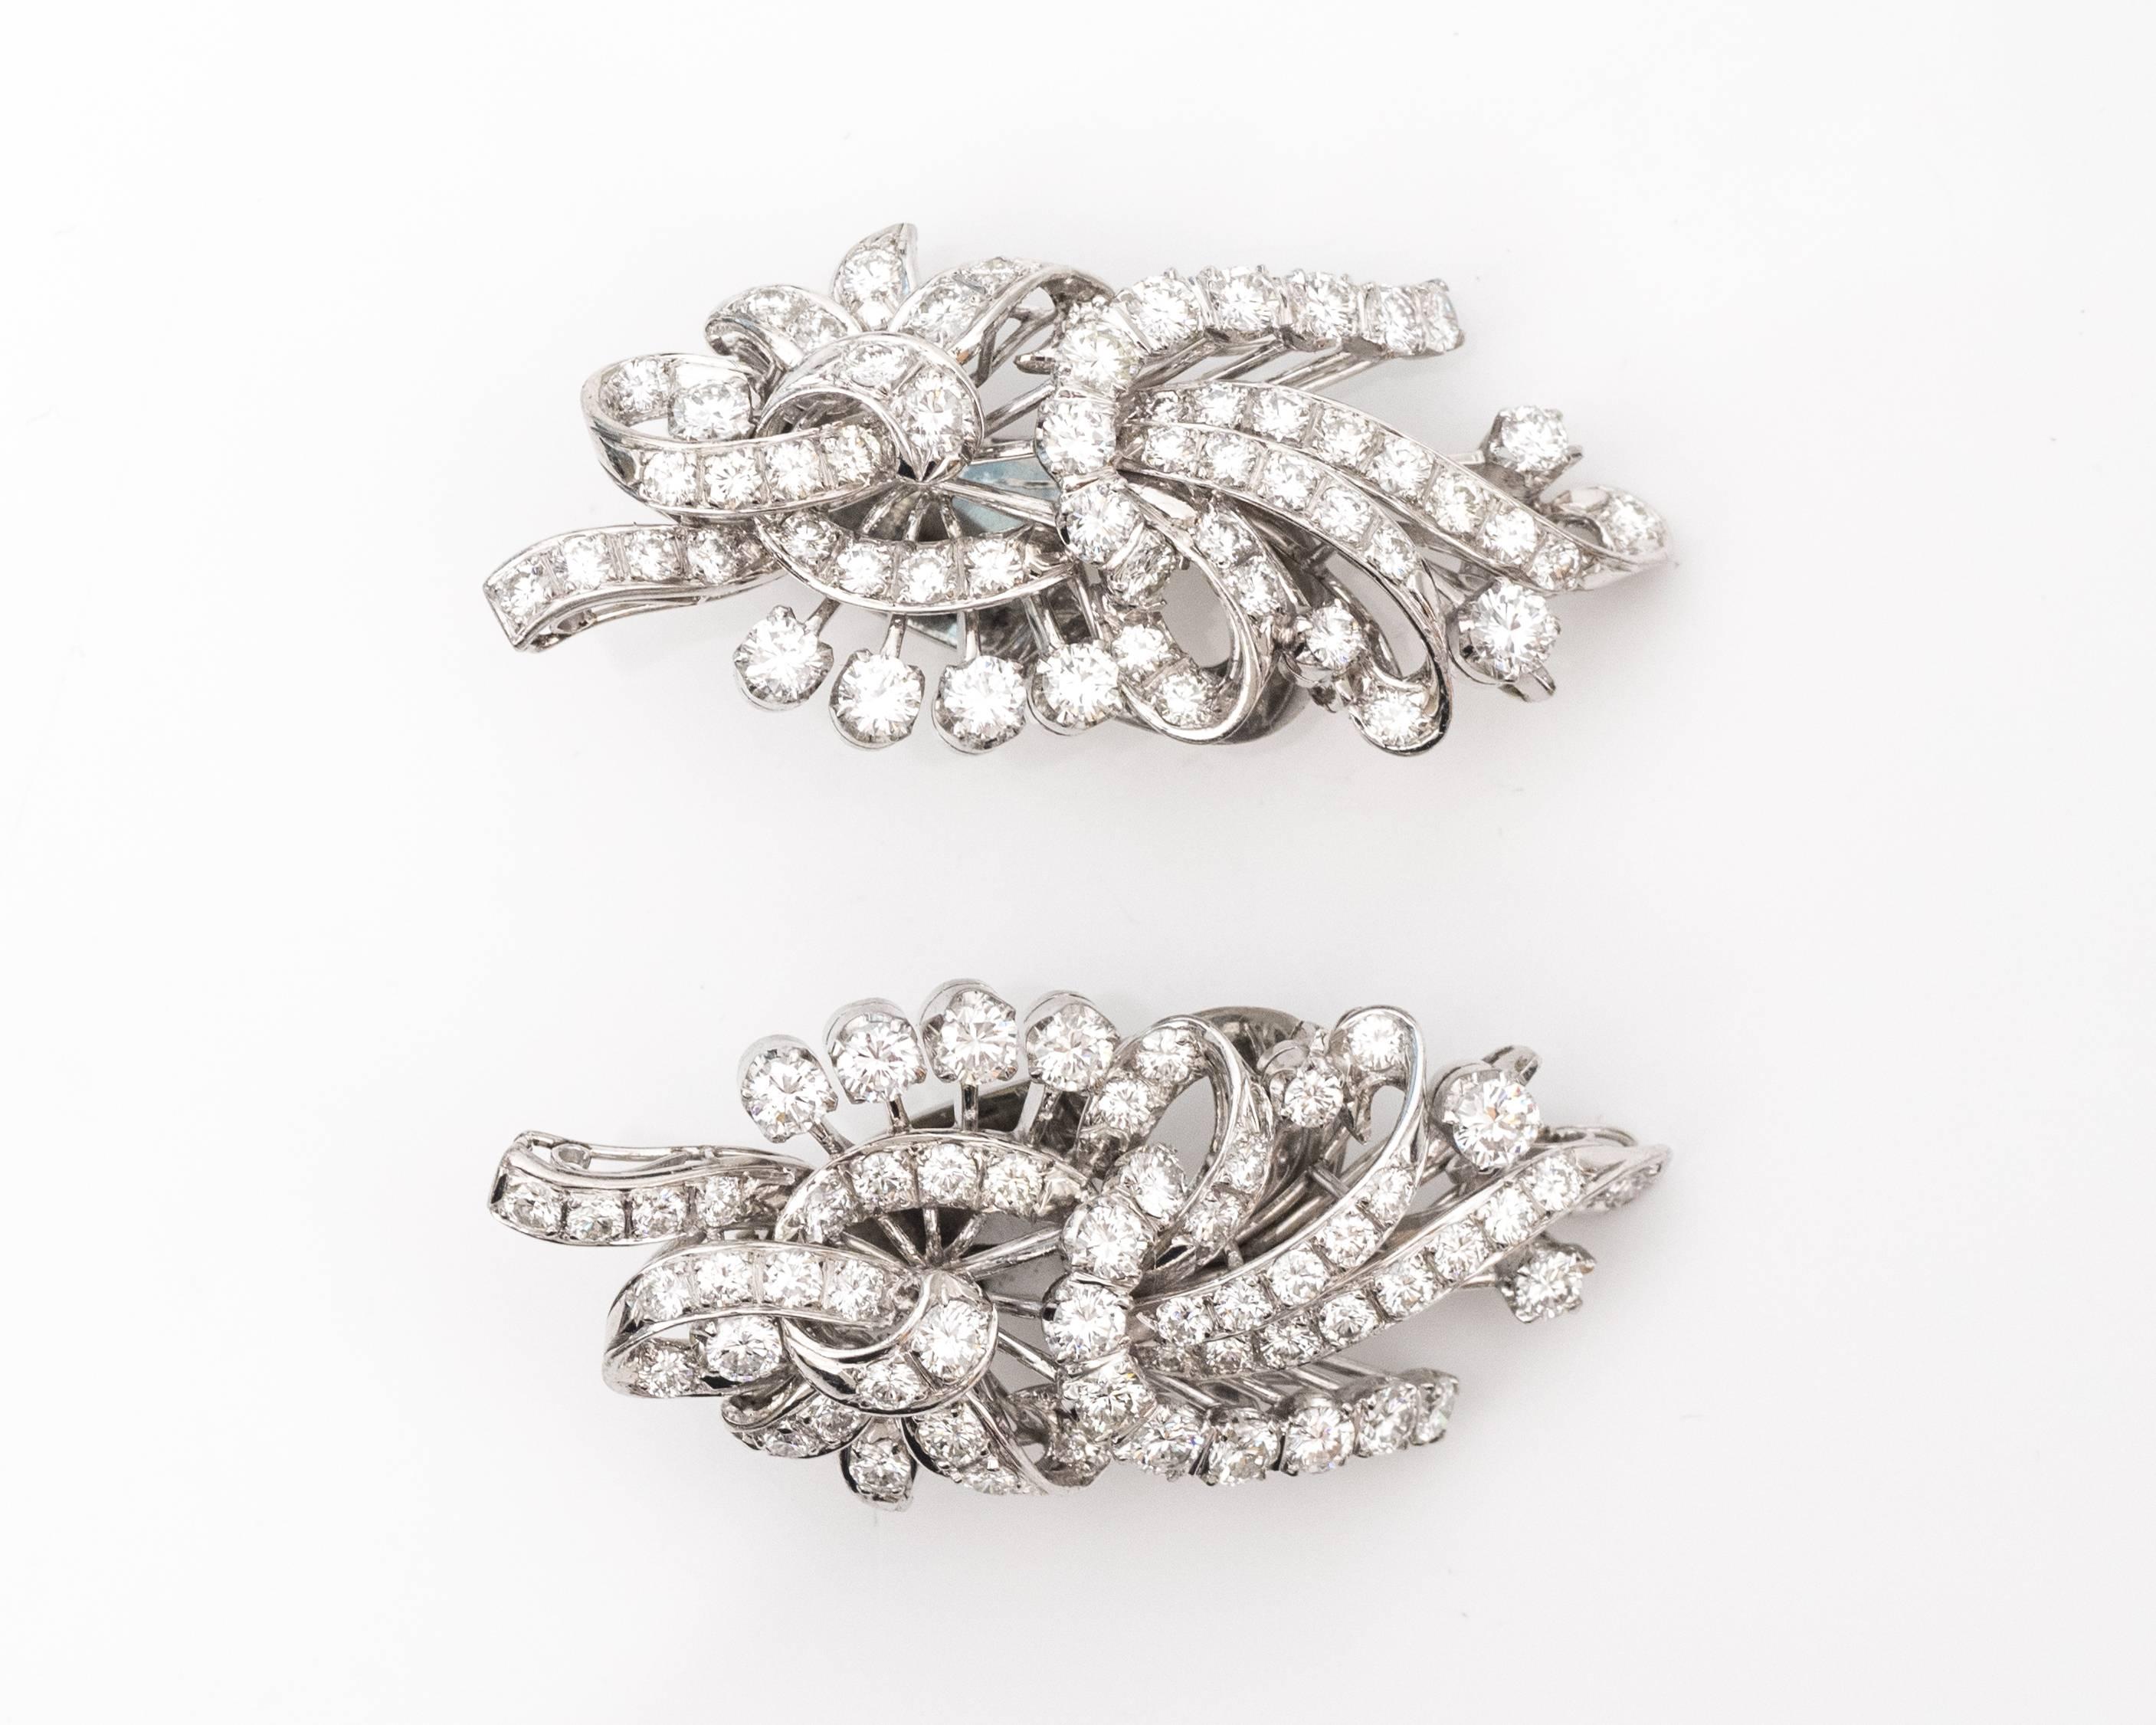 1950s Retro Diamond Platinum Earrings feature 6.0 carat total weight Diamonds set in Platinum. Omega lever backs provide extra security, stability and wearing comfort. The earrings measure 1.7 inches long x .75 inches wide.

 These over-the-top